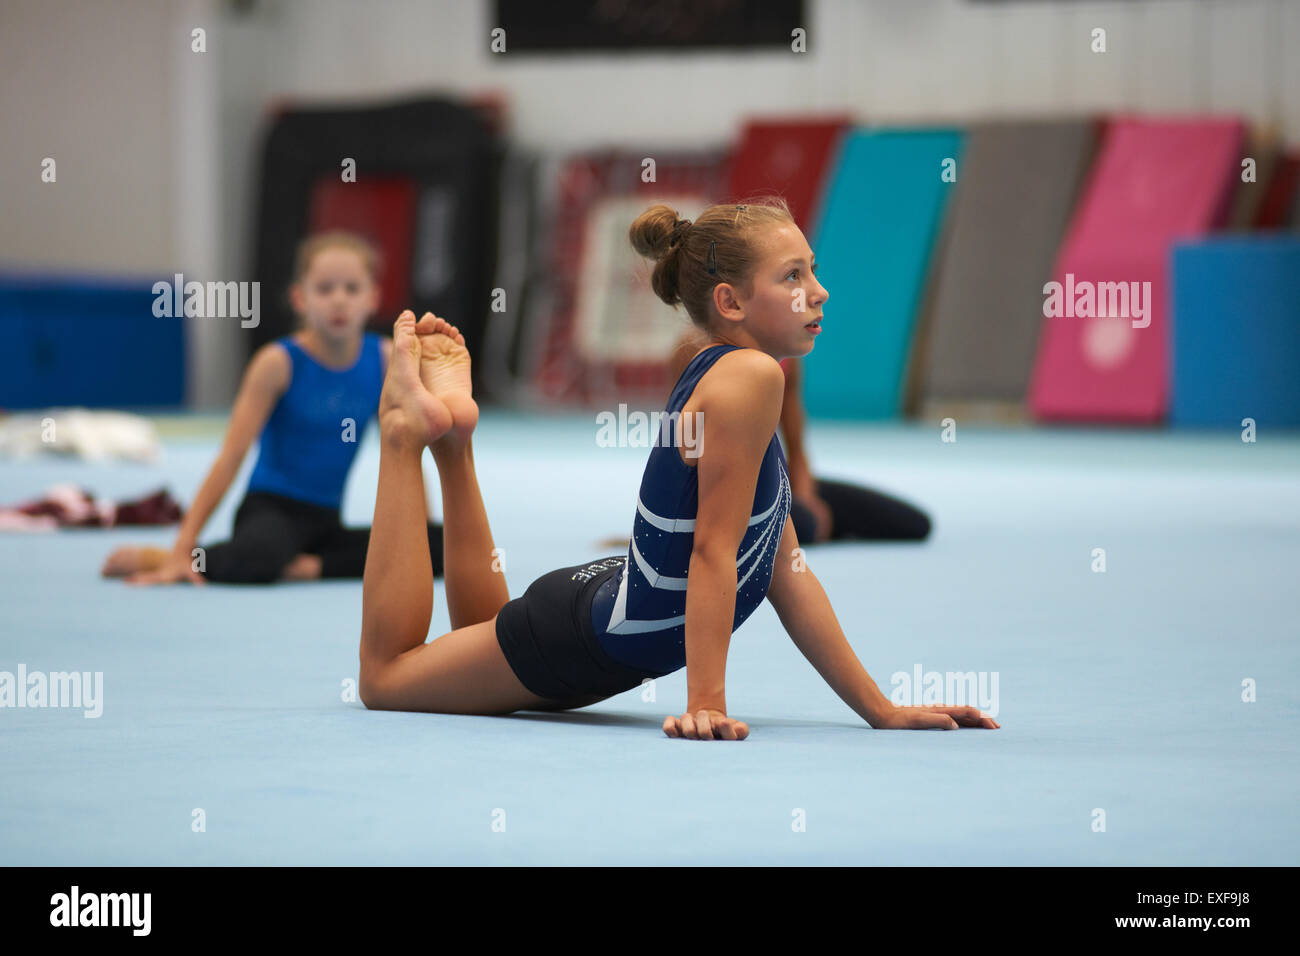 Young gymnasts practising moves Stock Photo